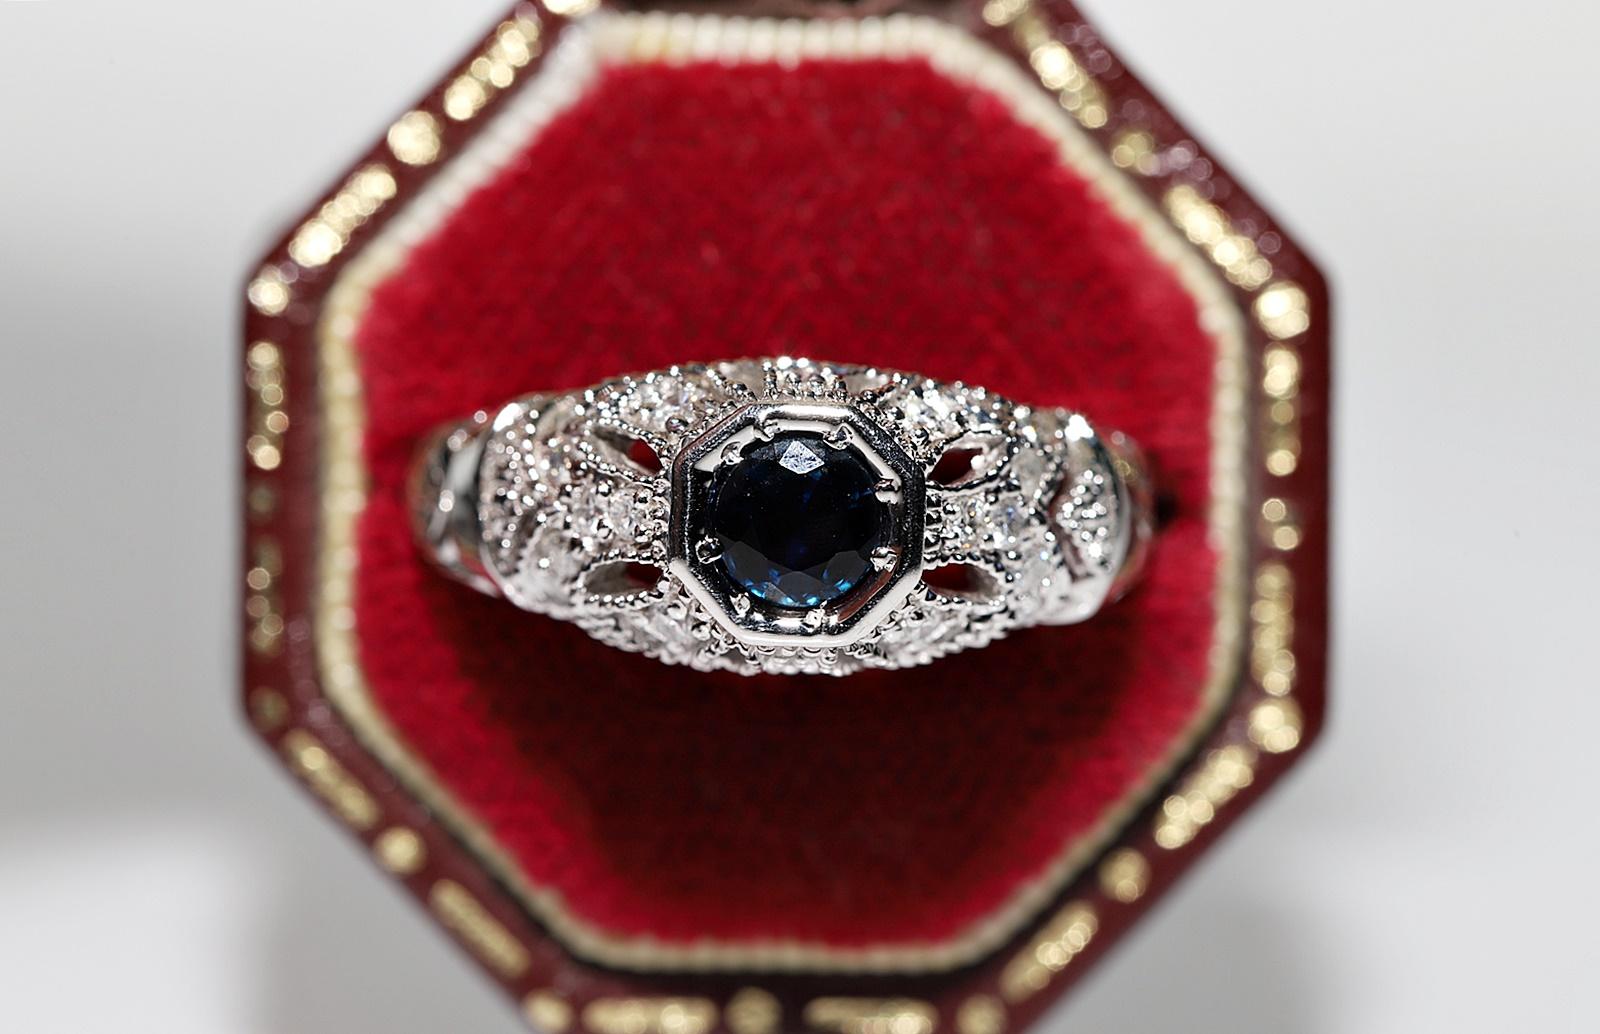 In very good condition.
Total weight is 4.5 grams.
Totally is diamond 0.40 ct.
The diamond is has G-H color and s1-s2-Pique1 clarity.
Totally is sapphire 0.50 ct.
Ring size is US 6 (We offer free resizing)
We can make any size.
Box is not